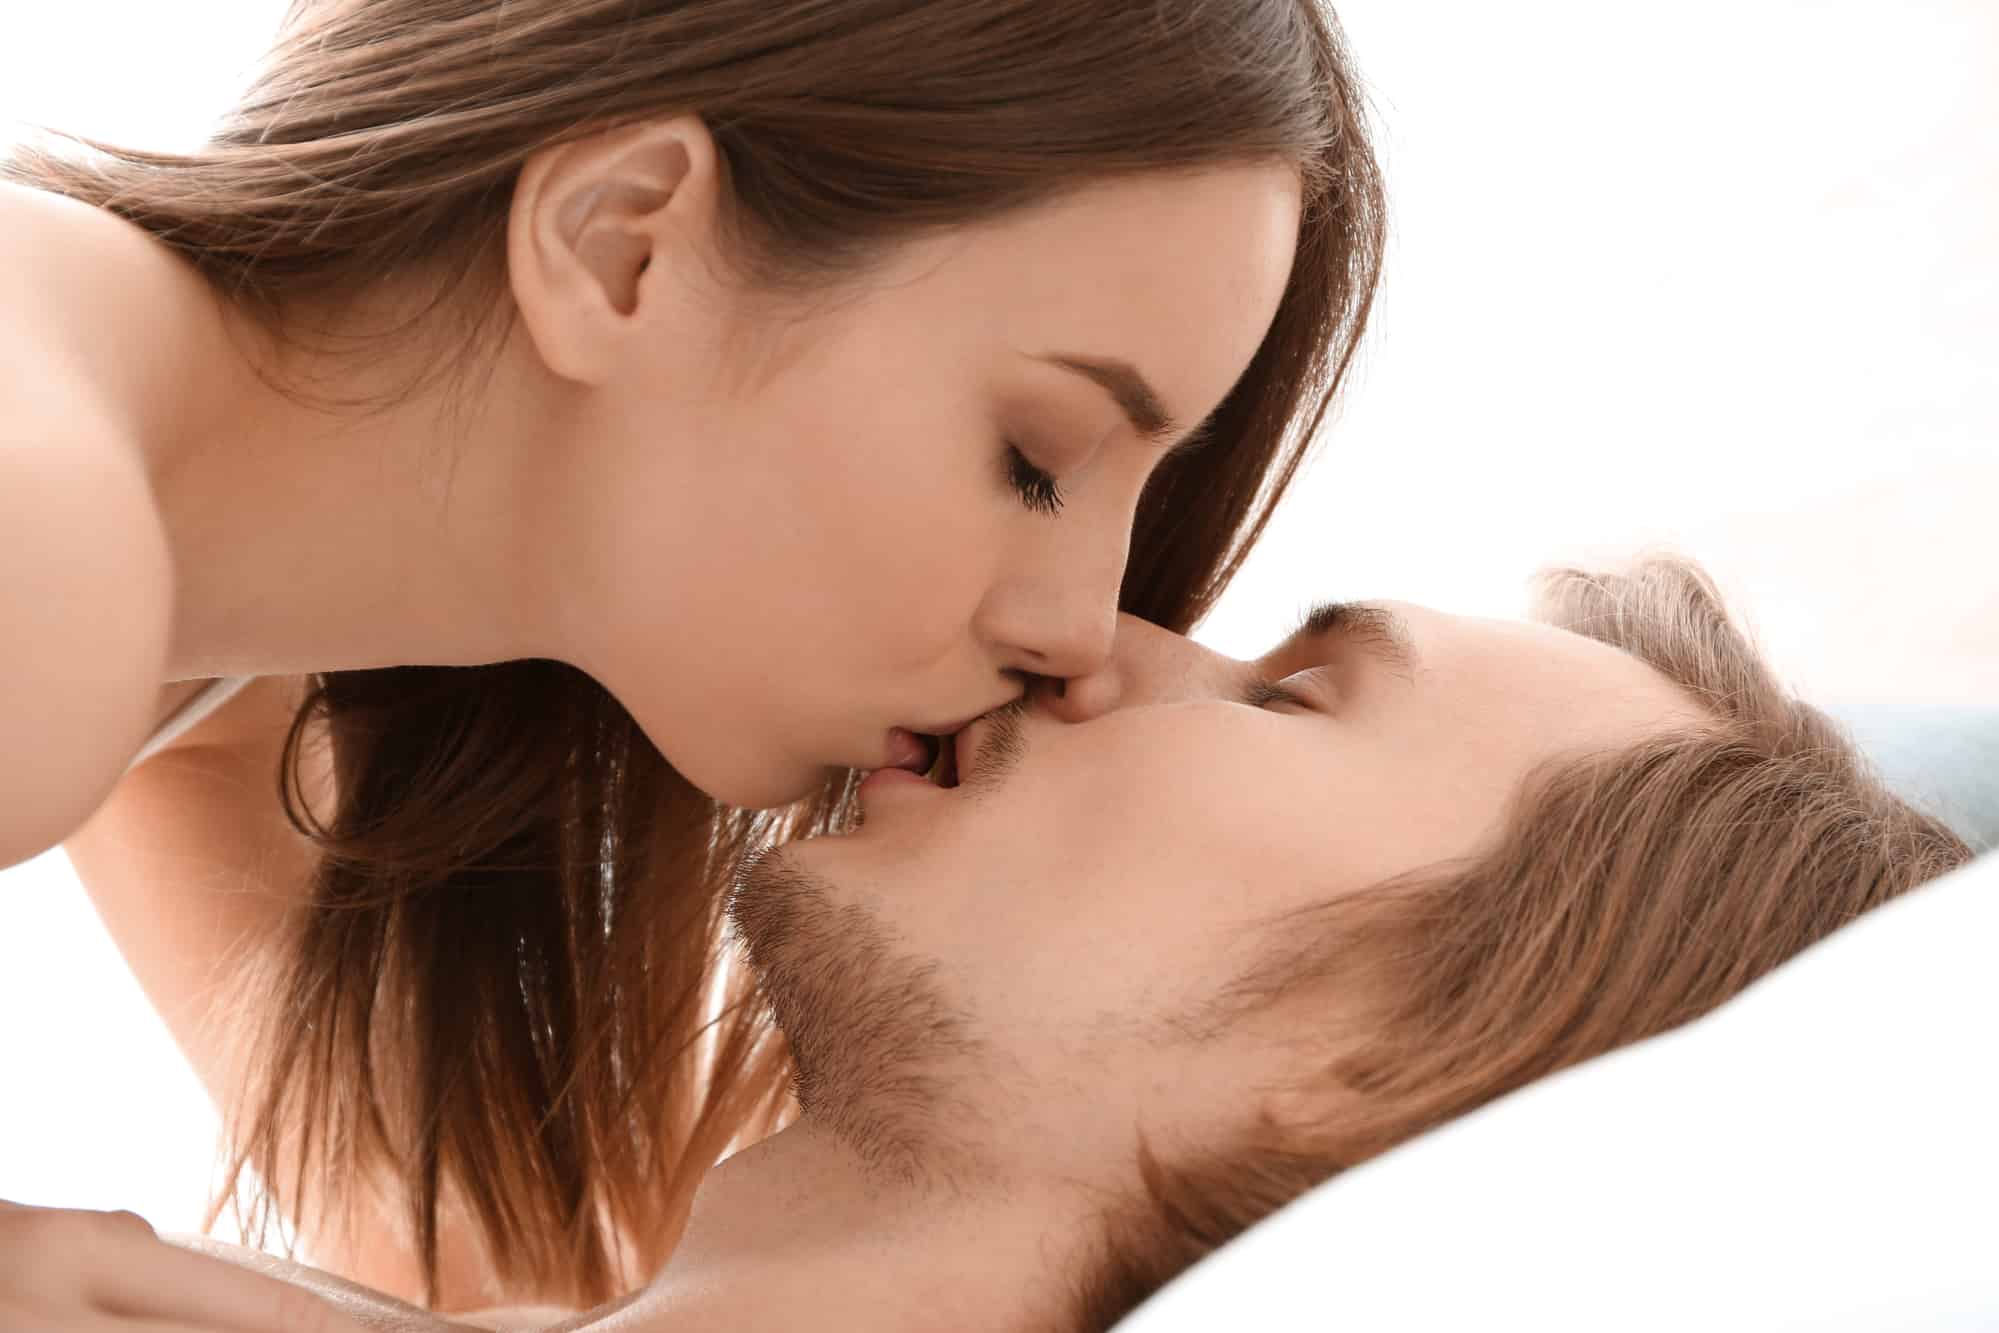 How to turn a guy on when kissing